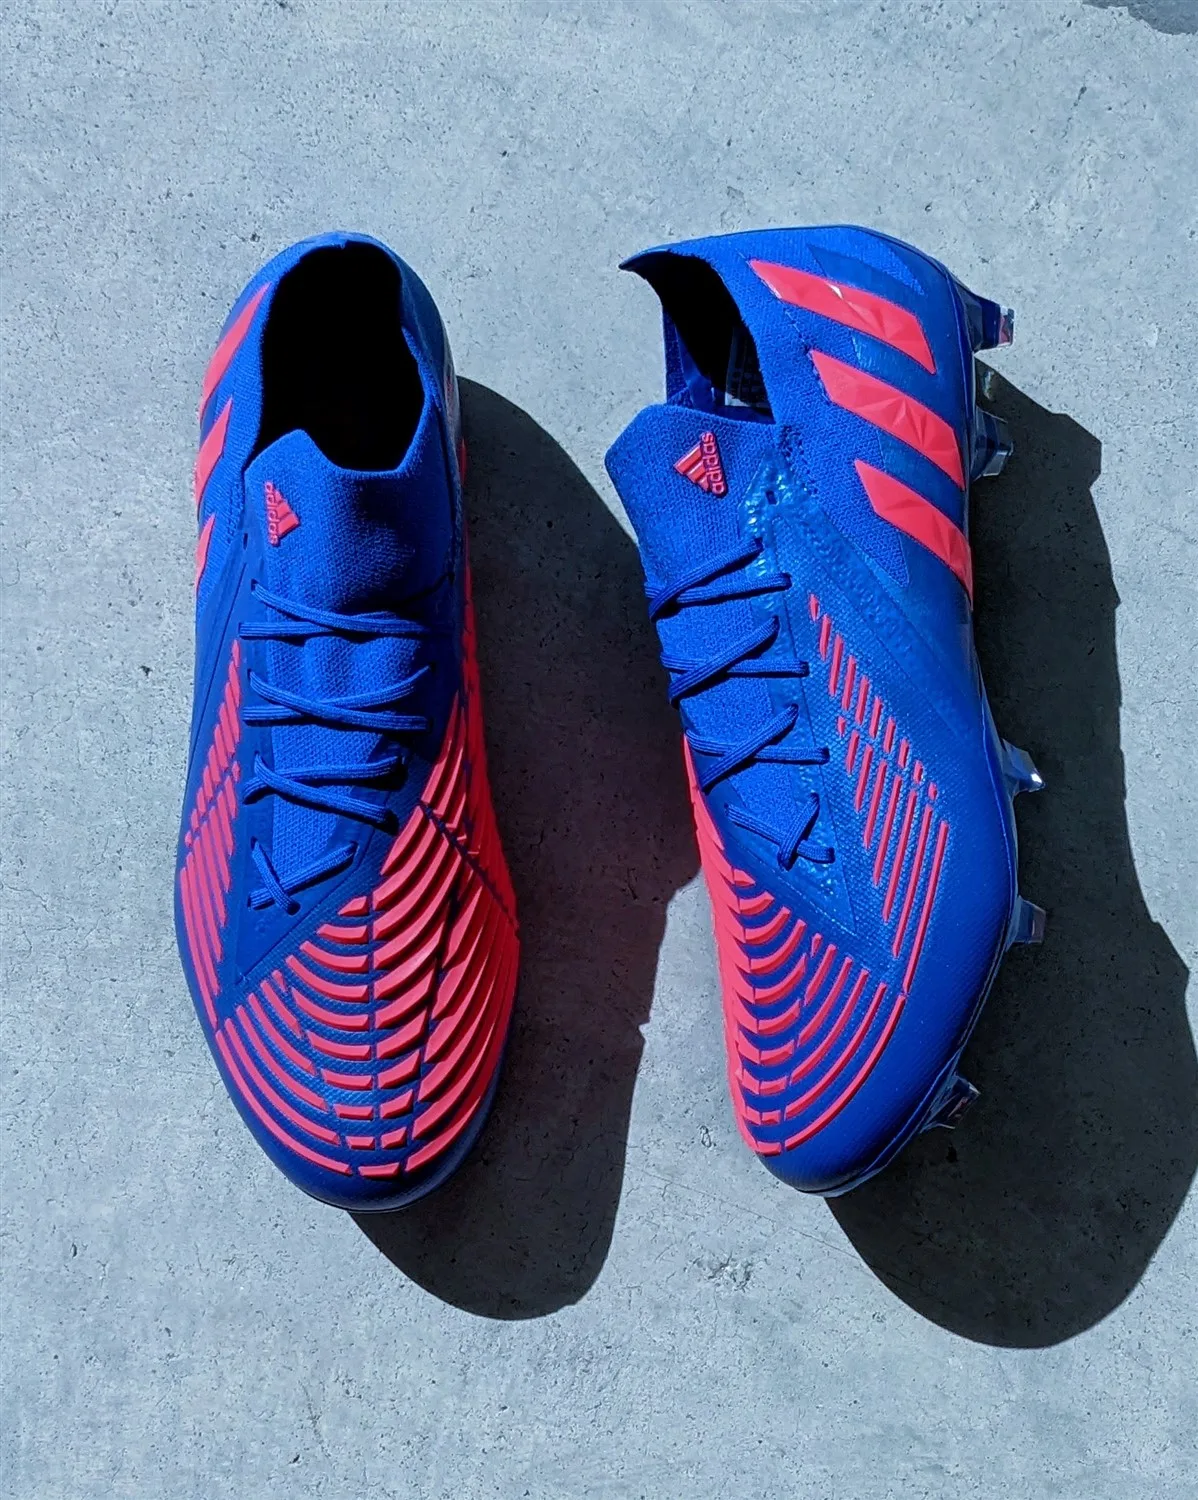 adidas predator edge football boot review soccer cleats boothype